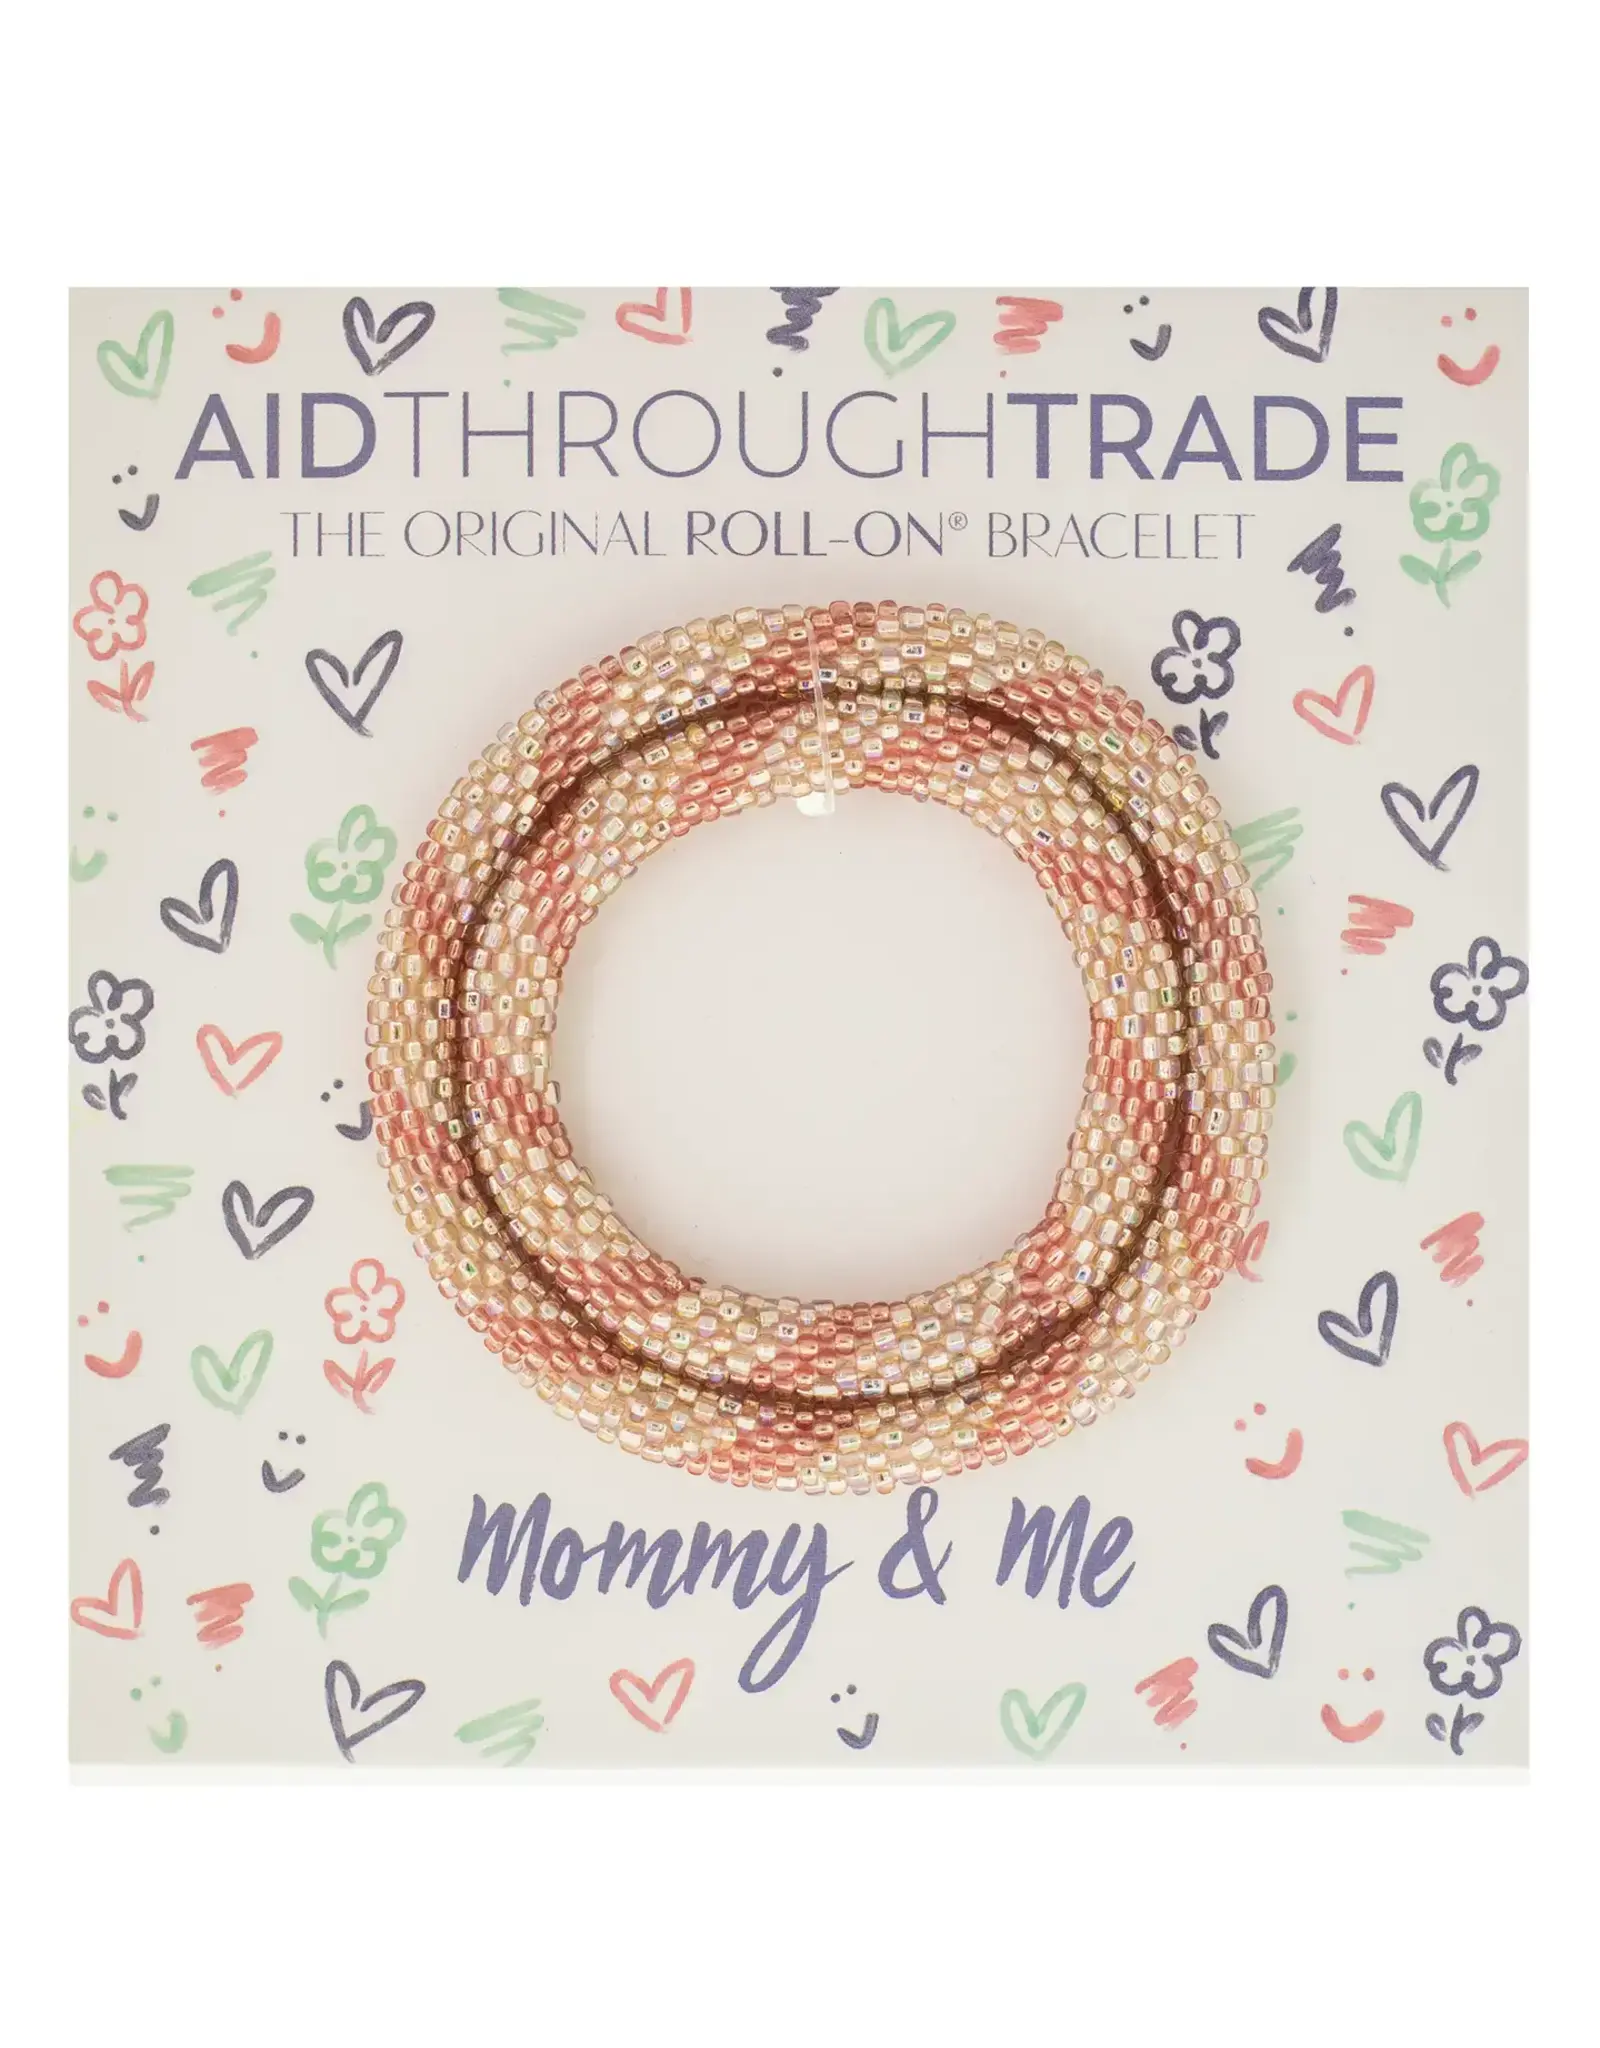 Aid Through Trade/Faire Mommy & Me Bracelets Glitter